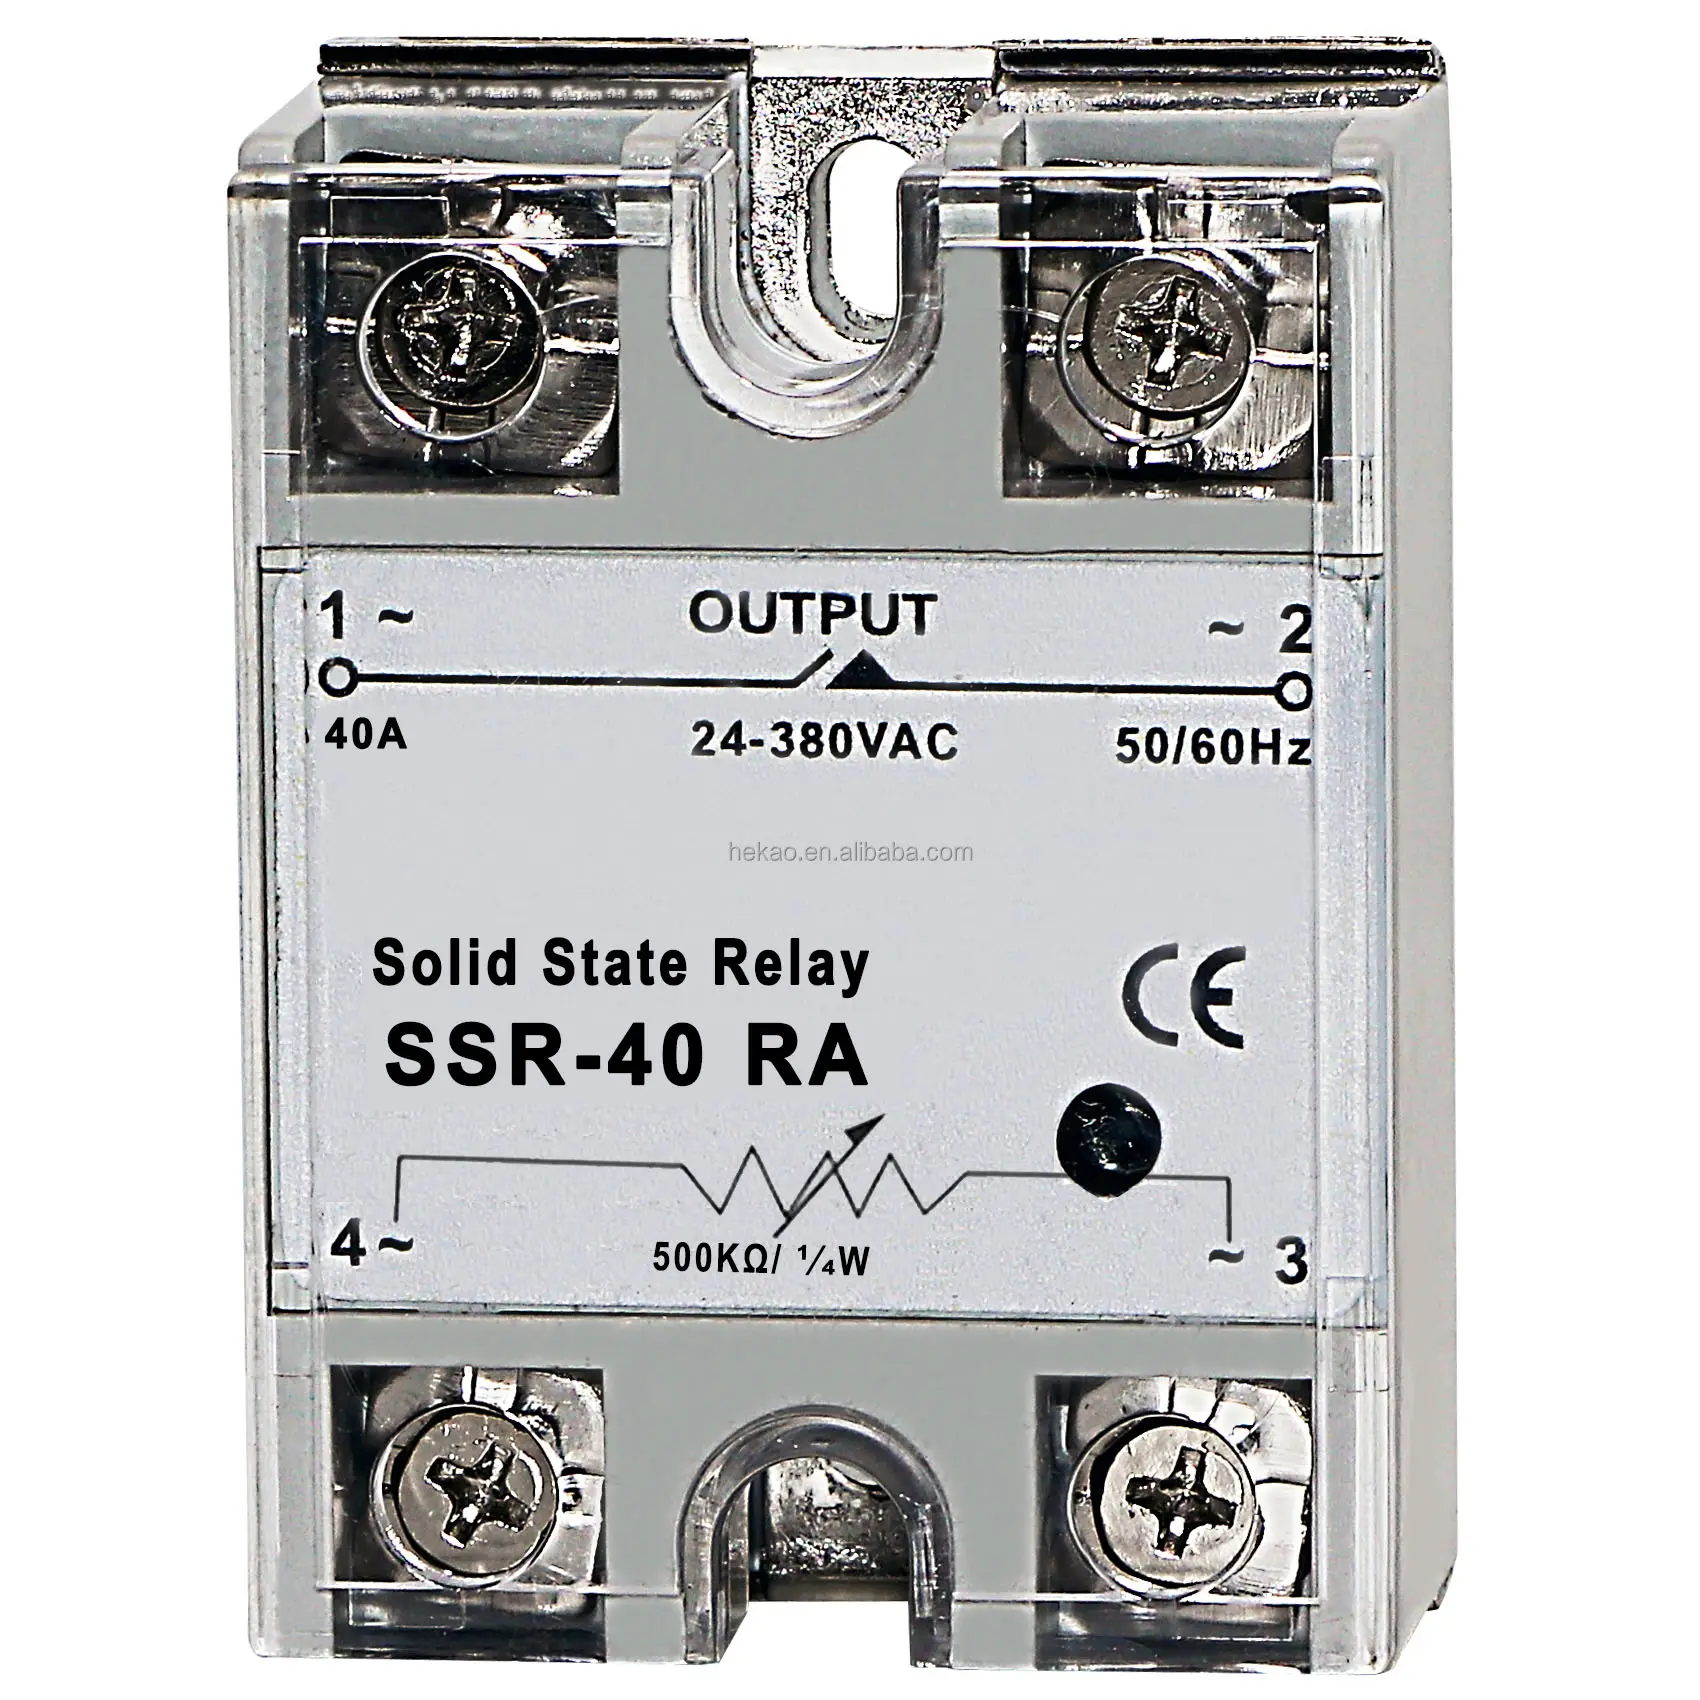 40A SSR Relay general purpose LED Protective Single phase voltage regulating solid state relay